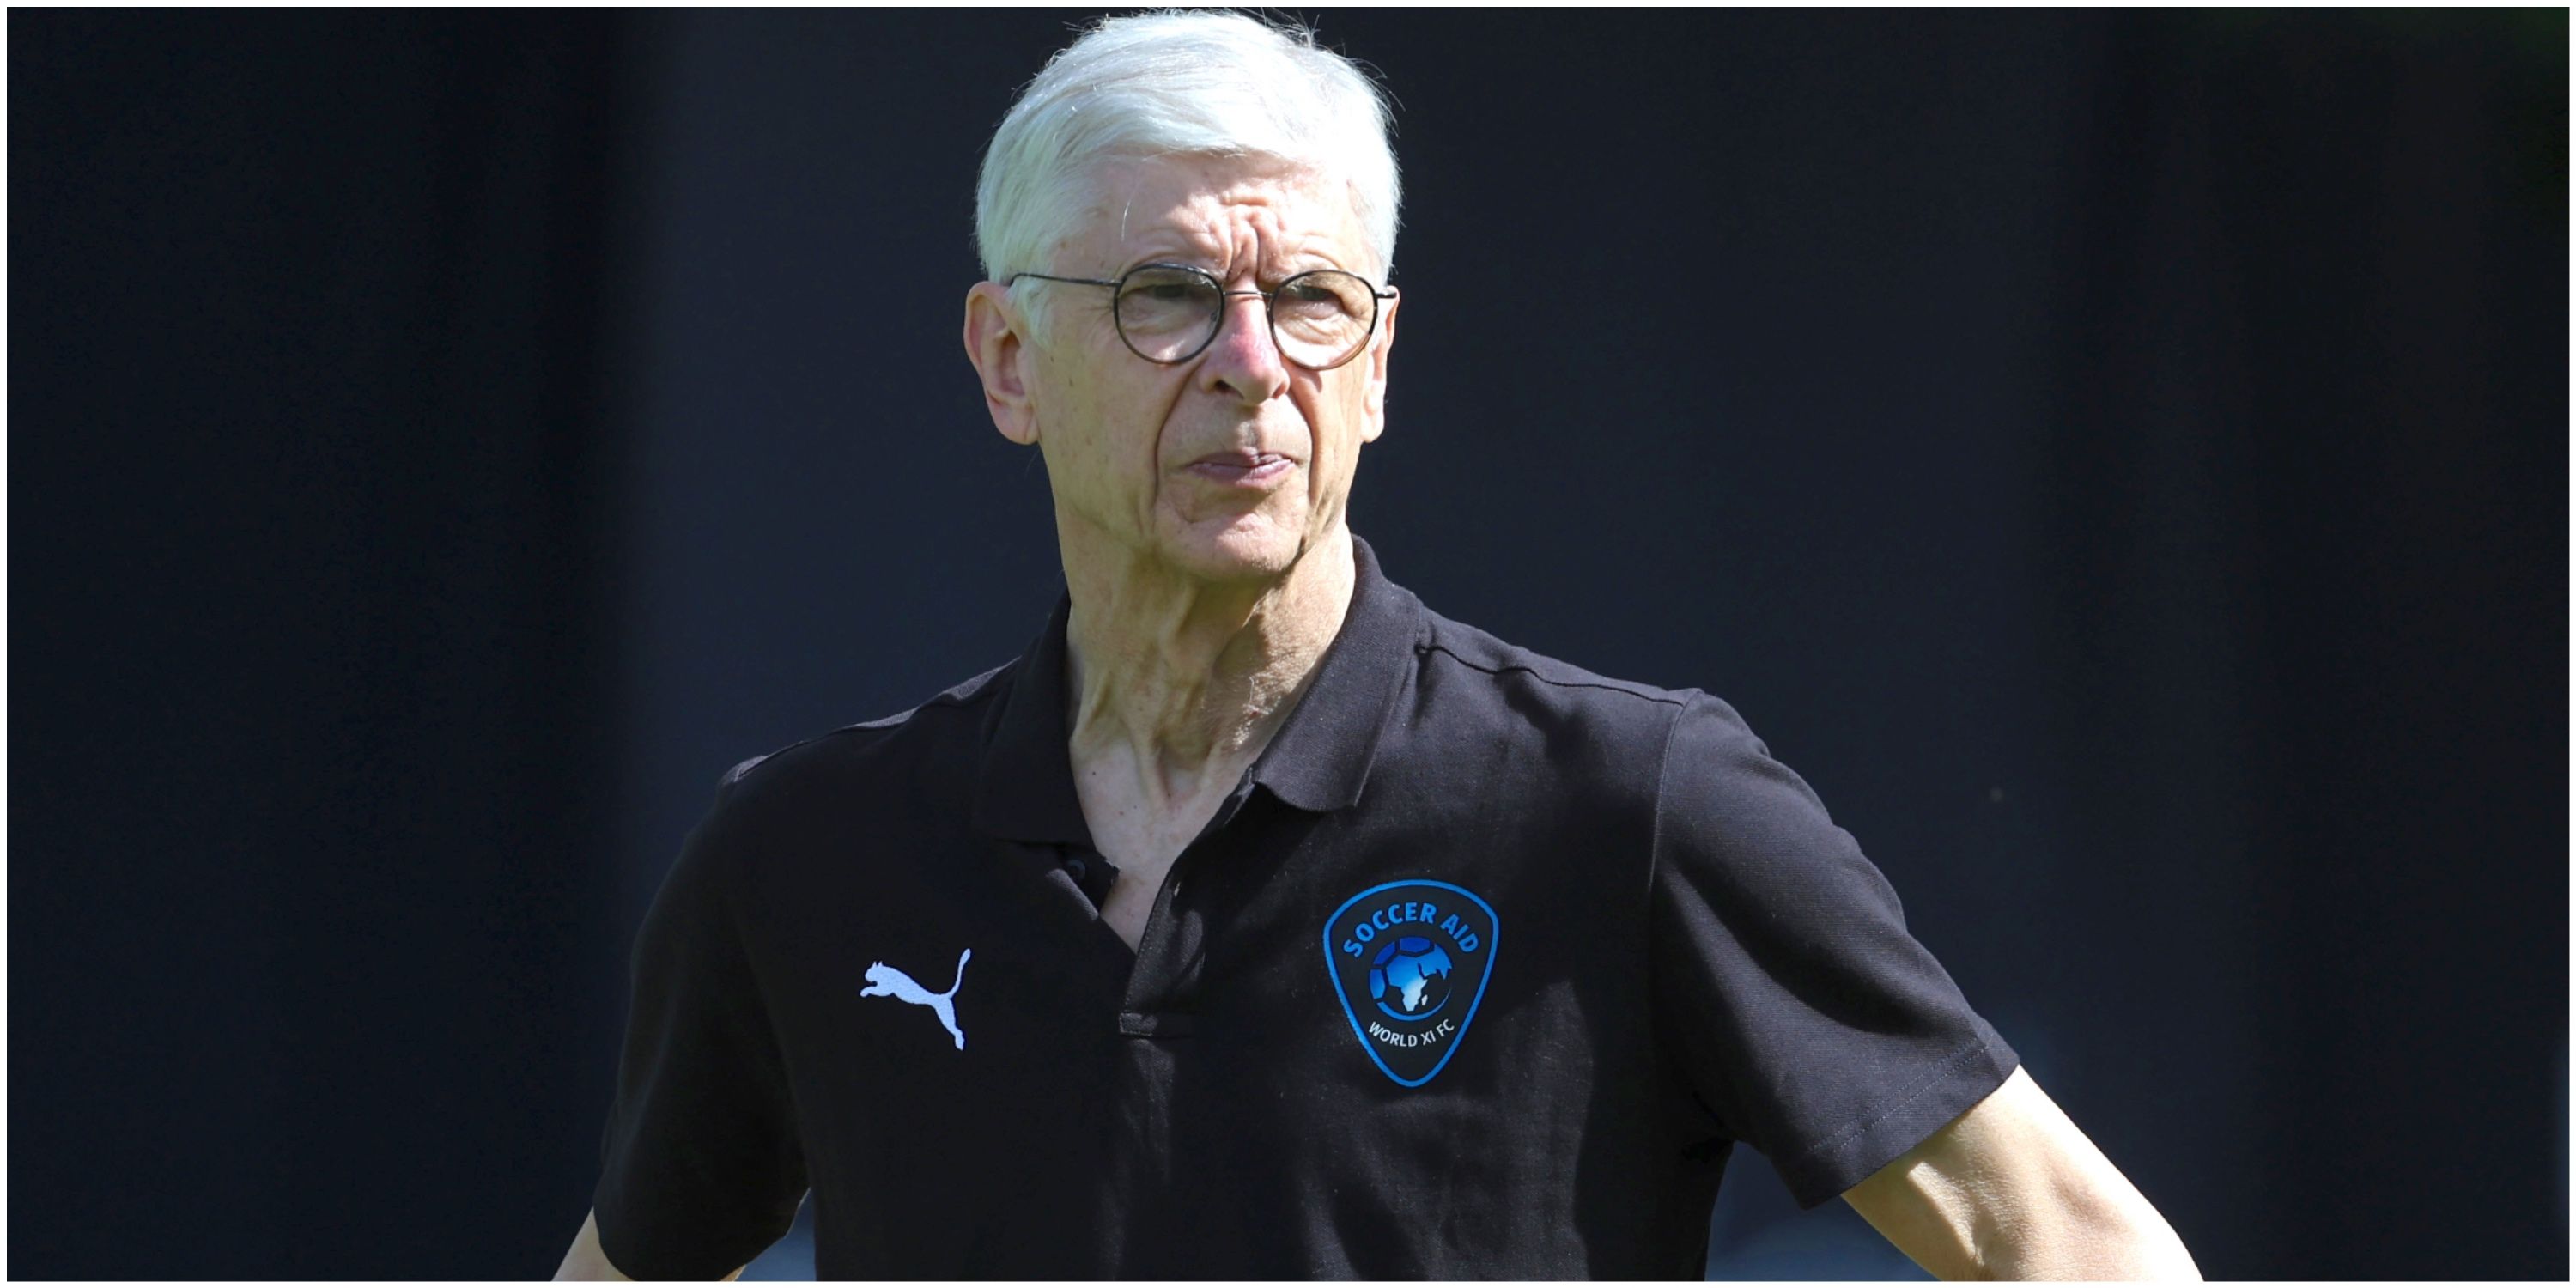 Arsene Wenger: Arsenal legend’s physique in his 70s is incredible